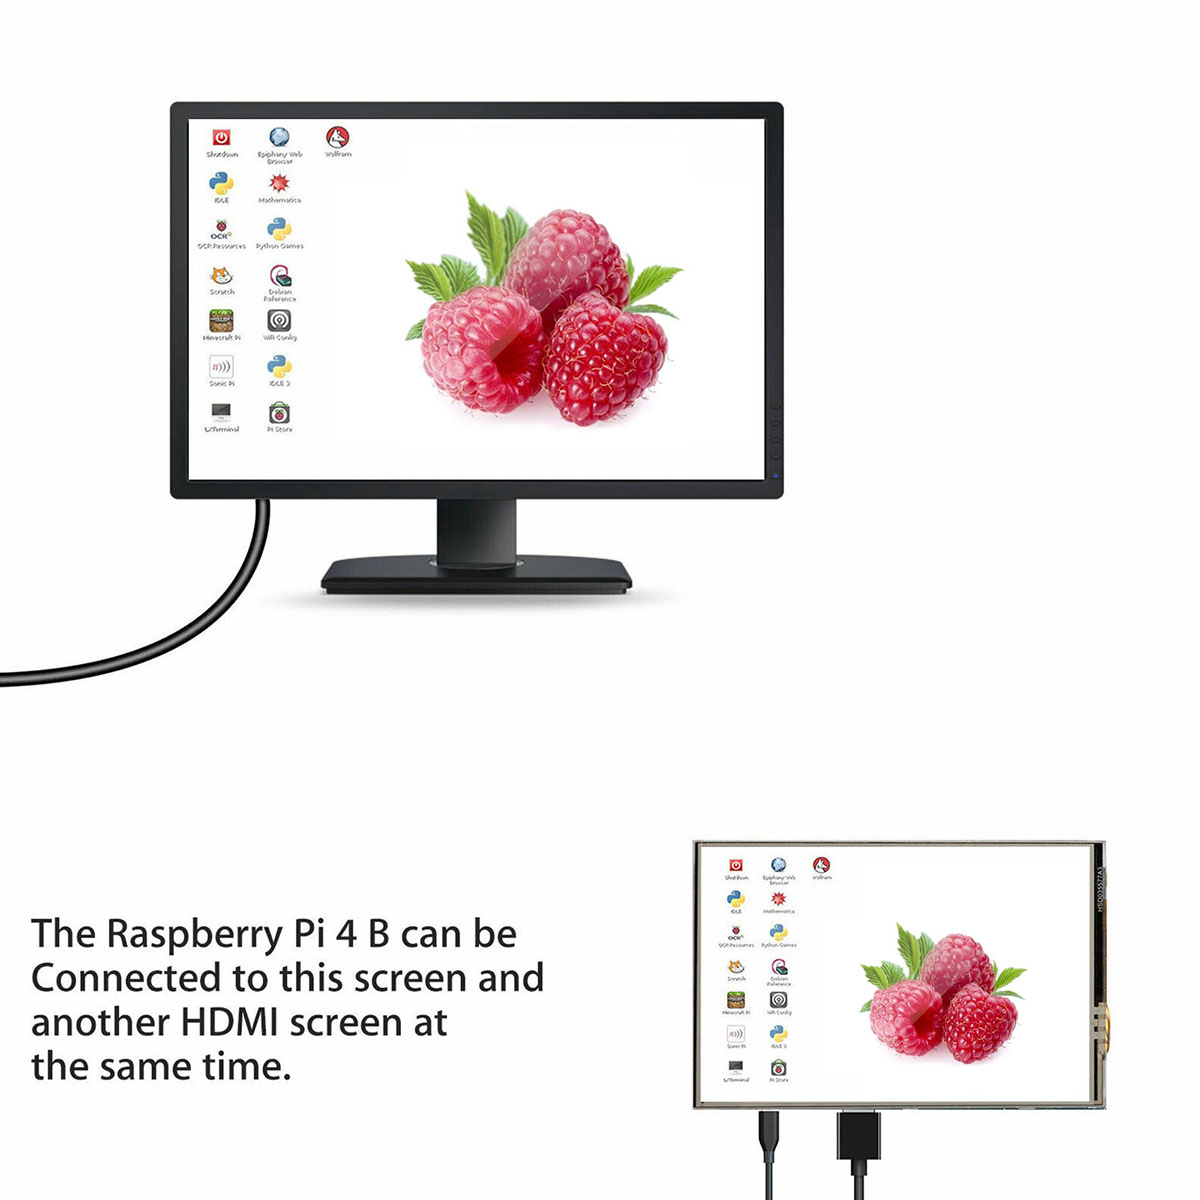 35-inch-HDMI-LCD-screen-with-touch-function-Support-480--320-to-1920--1080-for-Raspberry-Pi-1701845-4